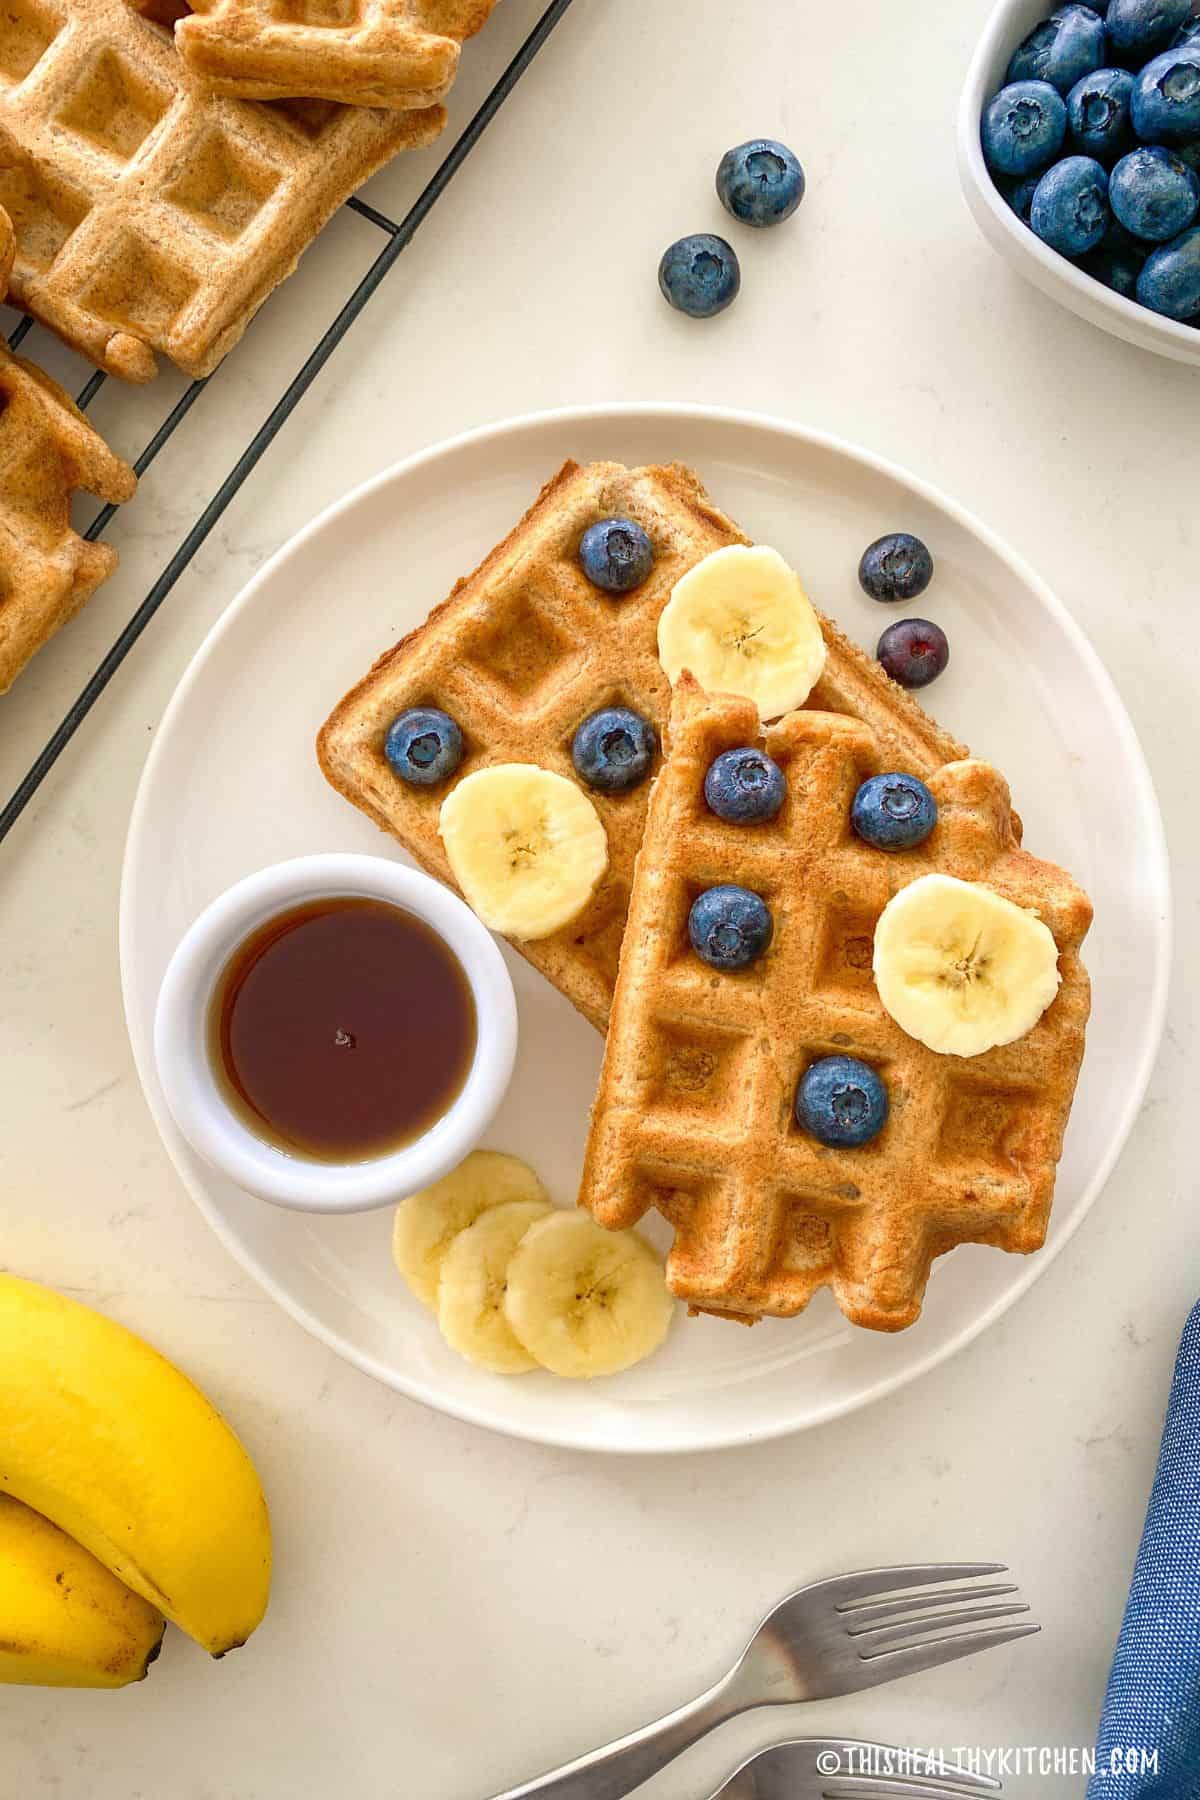 Plate with two waffles, with banana slices and blueberries on top and dipping bowl of maple syrup on the side.